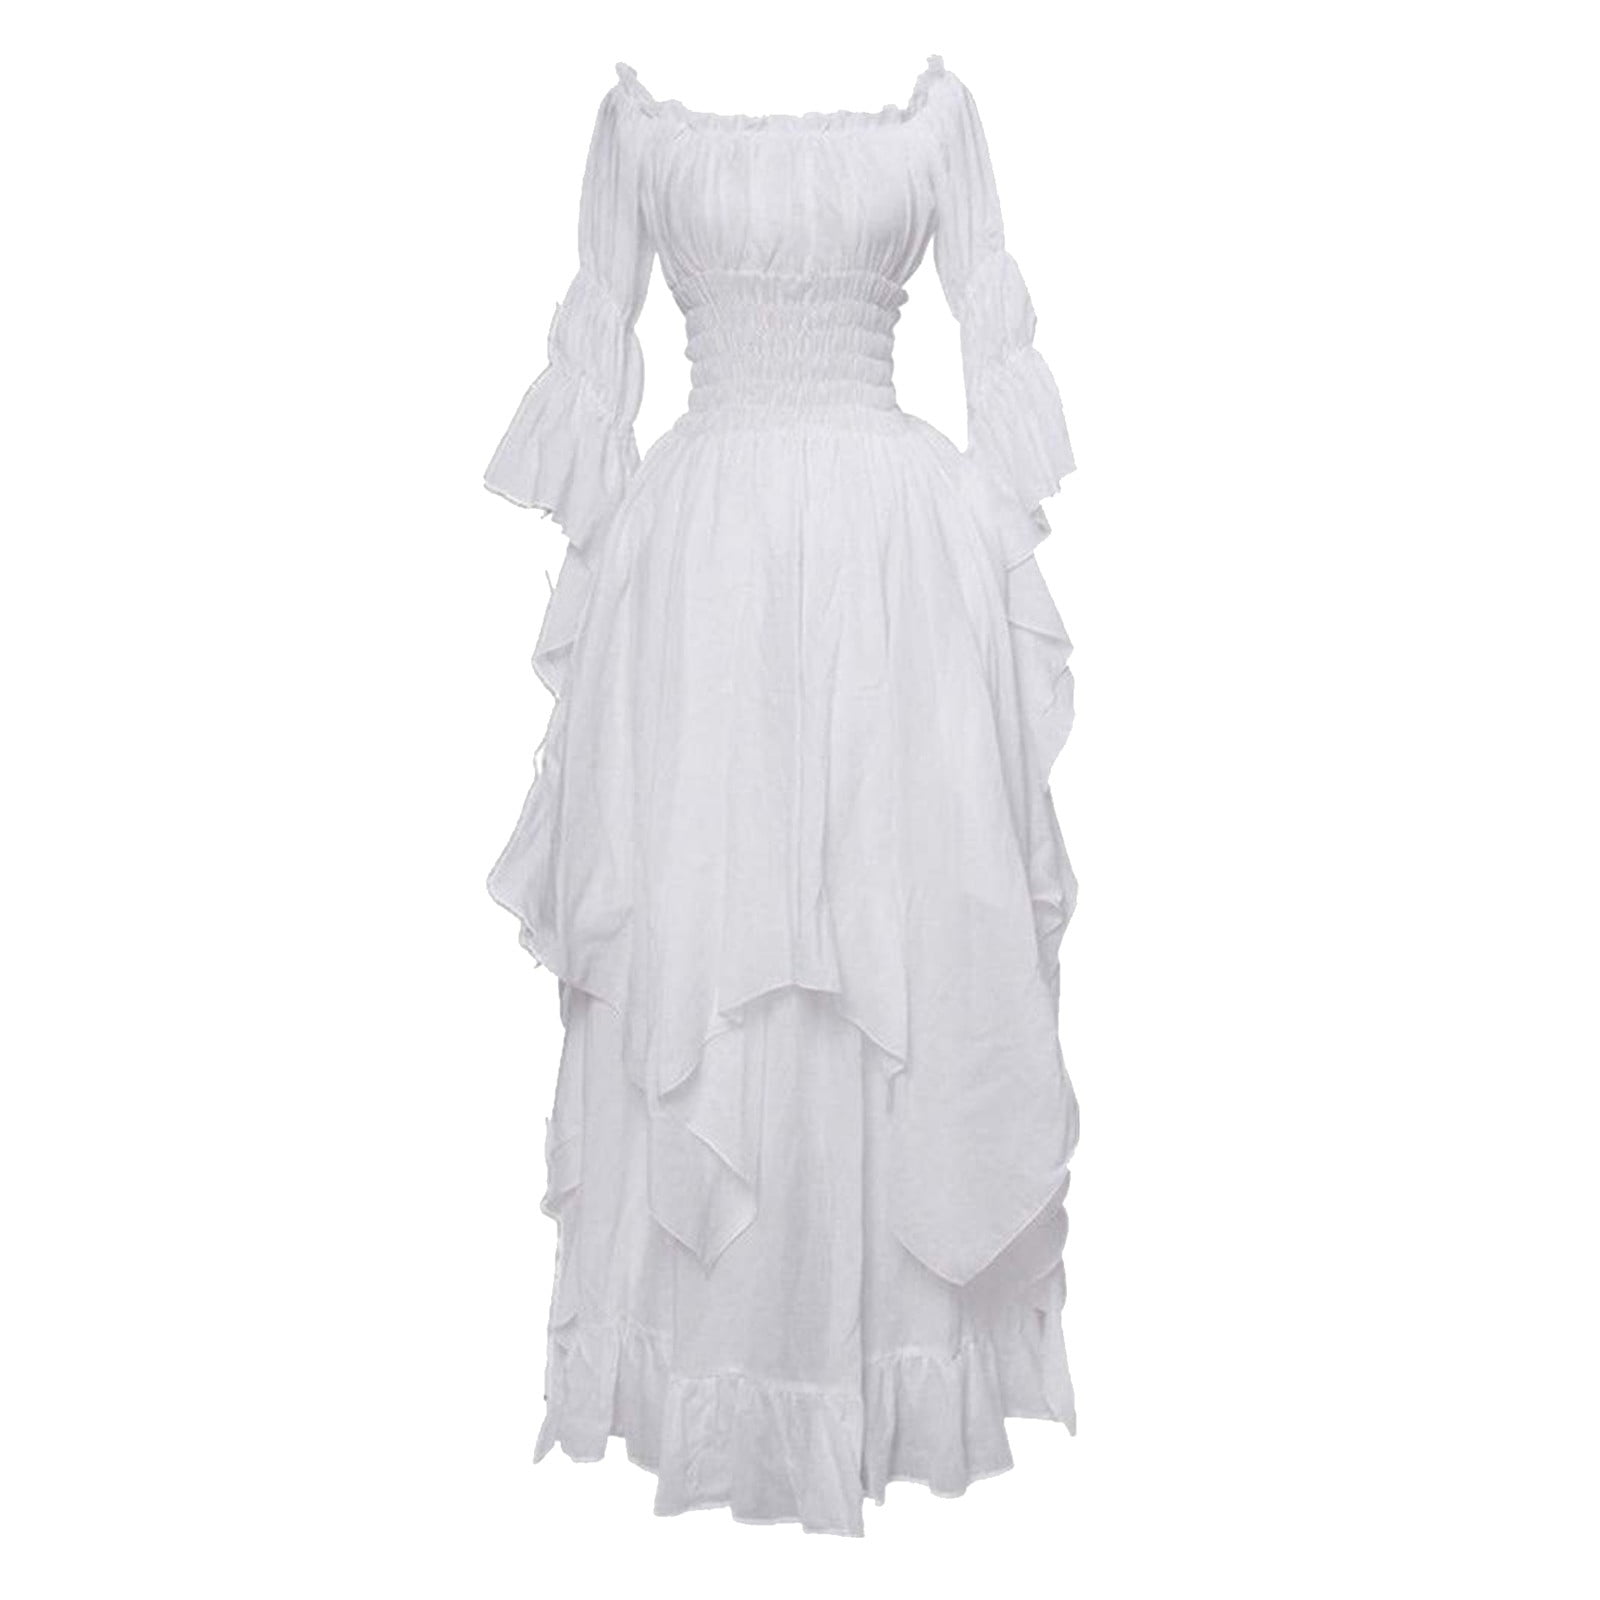 Buy Women's Medieval Victorian Dress Puff Sleeve High Low Ball Gown ...